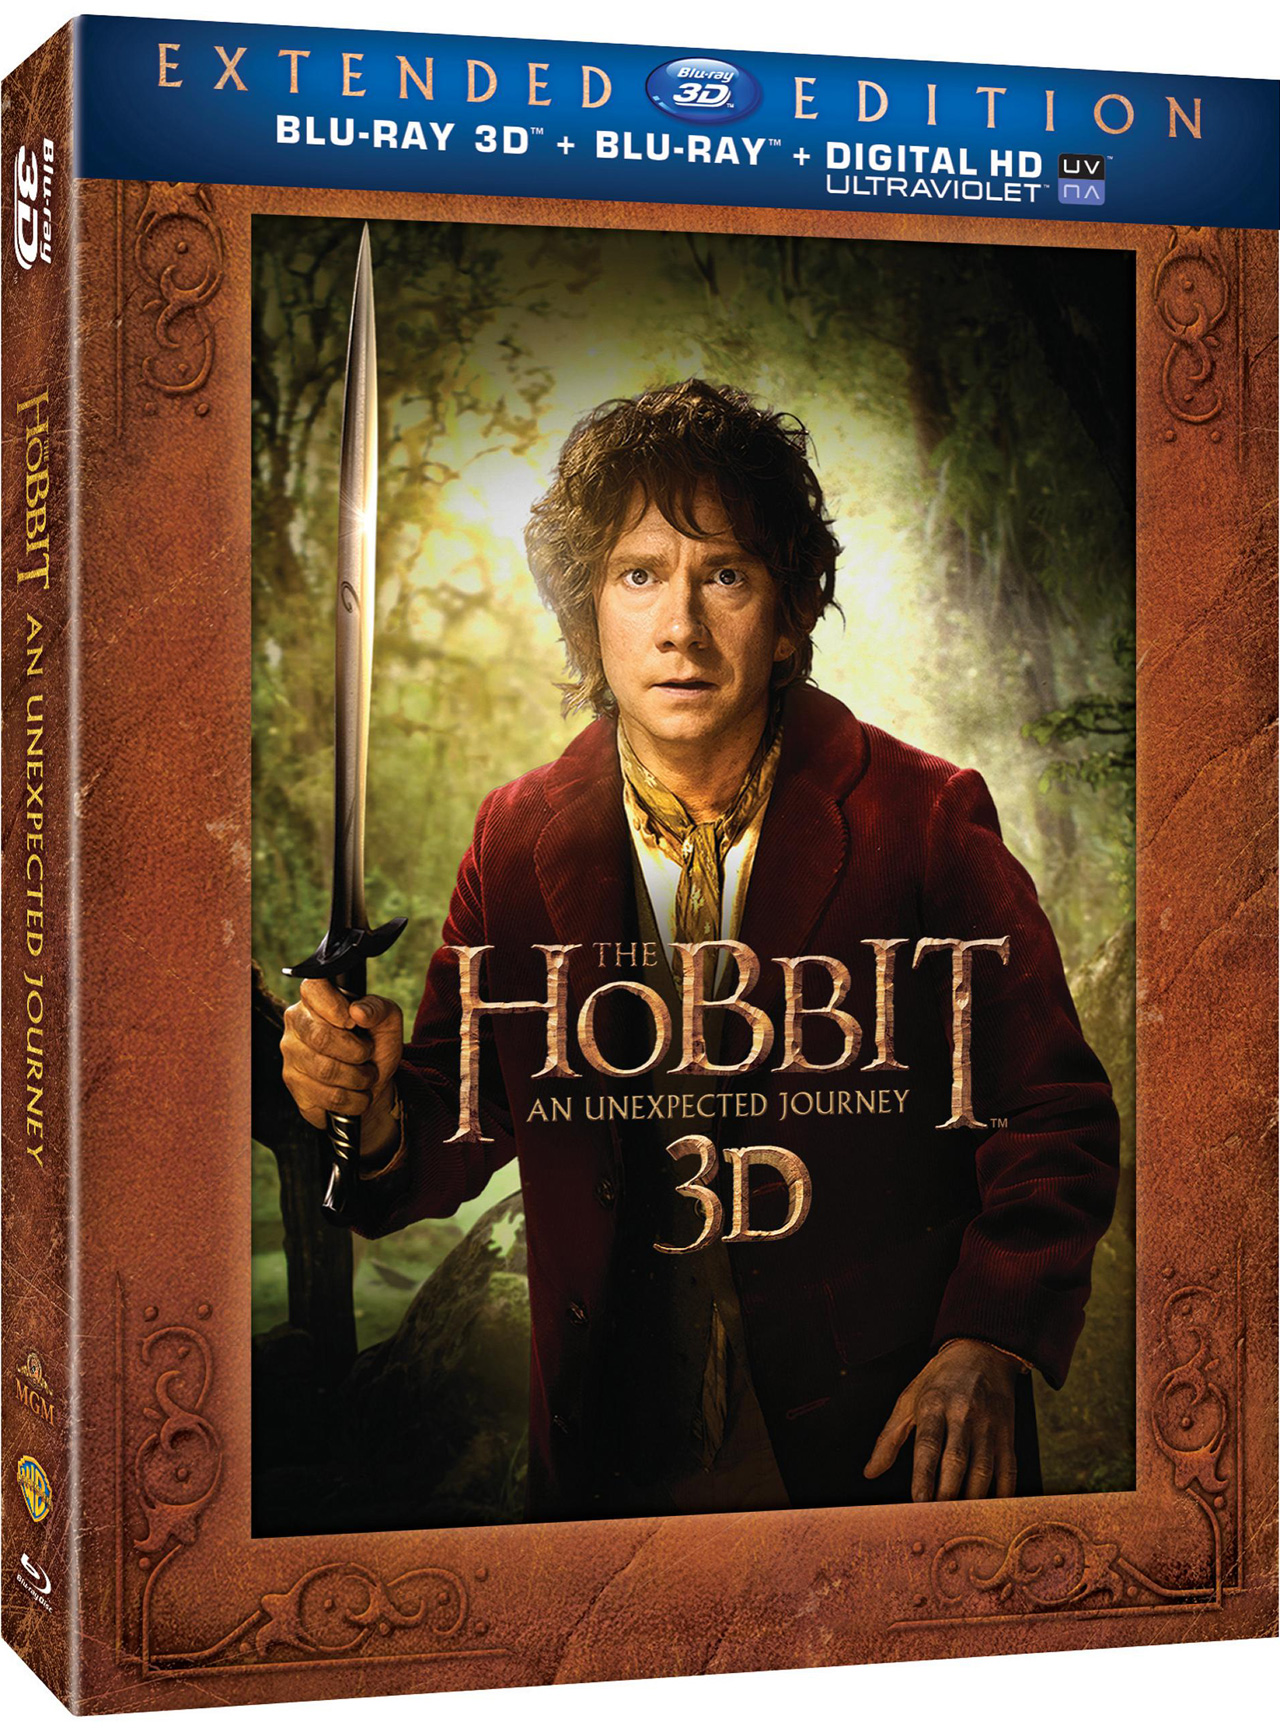 hobbit-extended-edition-3d-blu-ray-box-cover.jpg